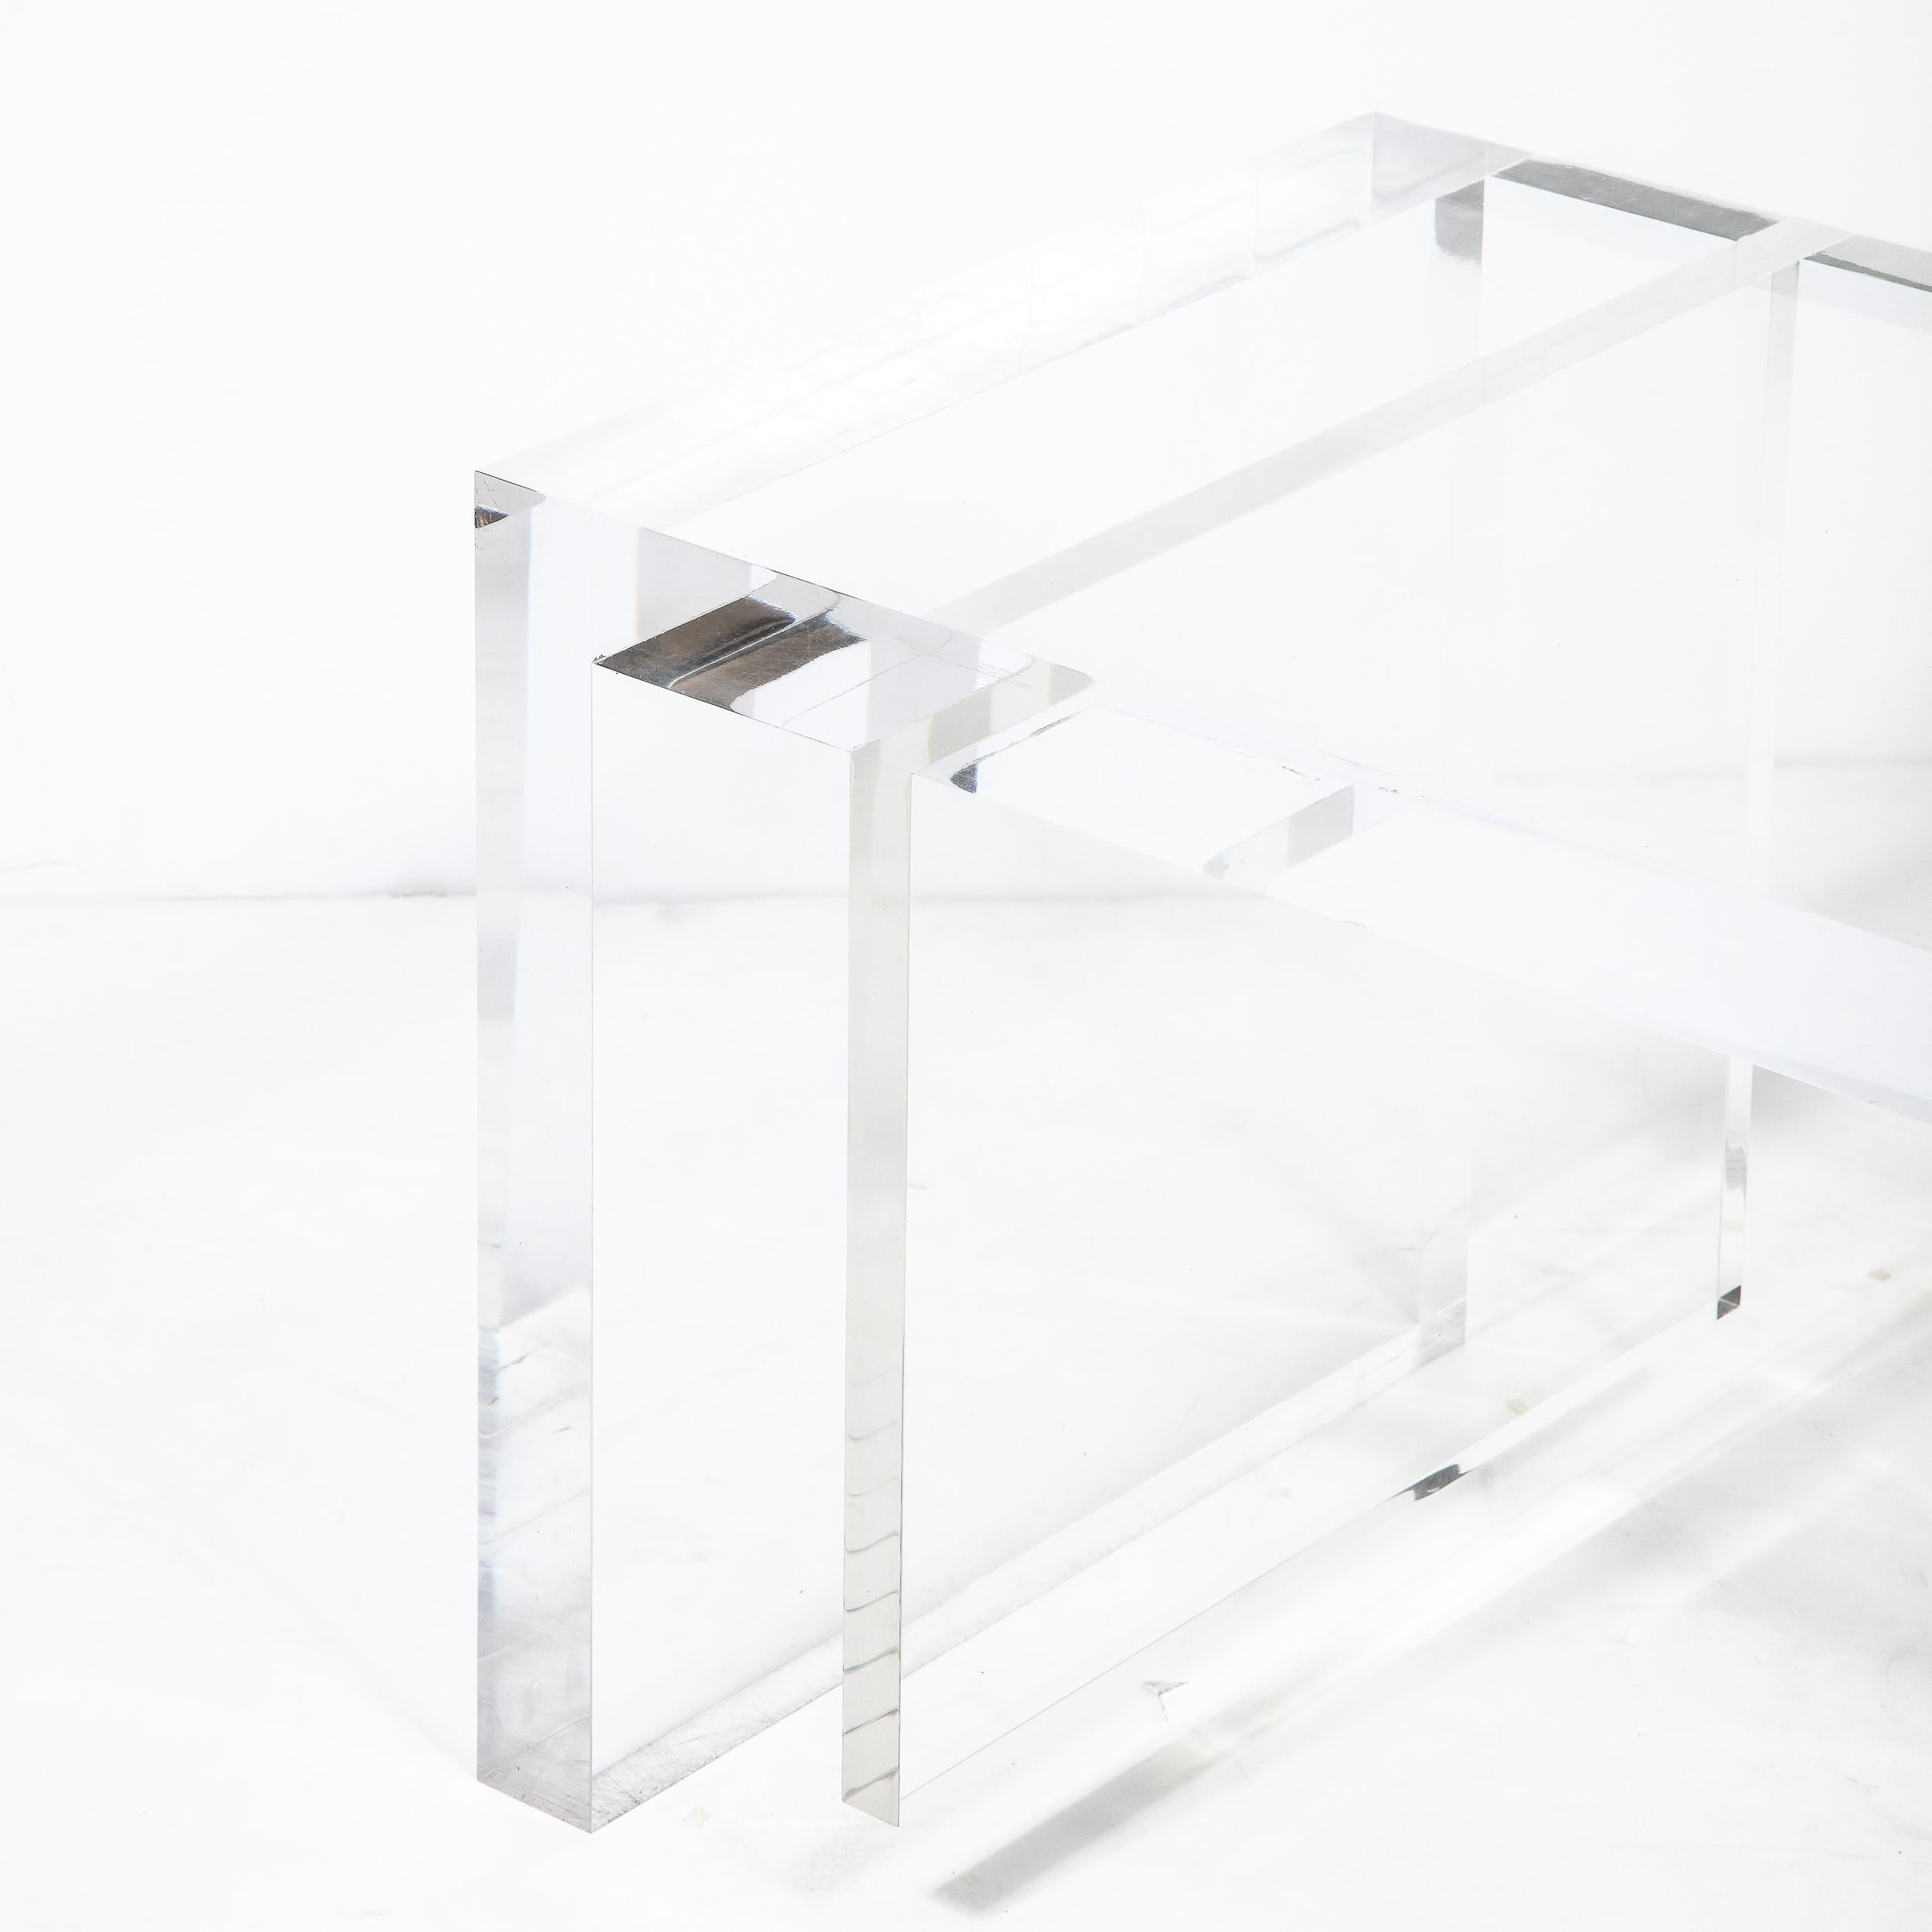 American Modernist Rectilinear Translucent Lucite Occasional/ Side Table For Sale